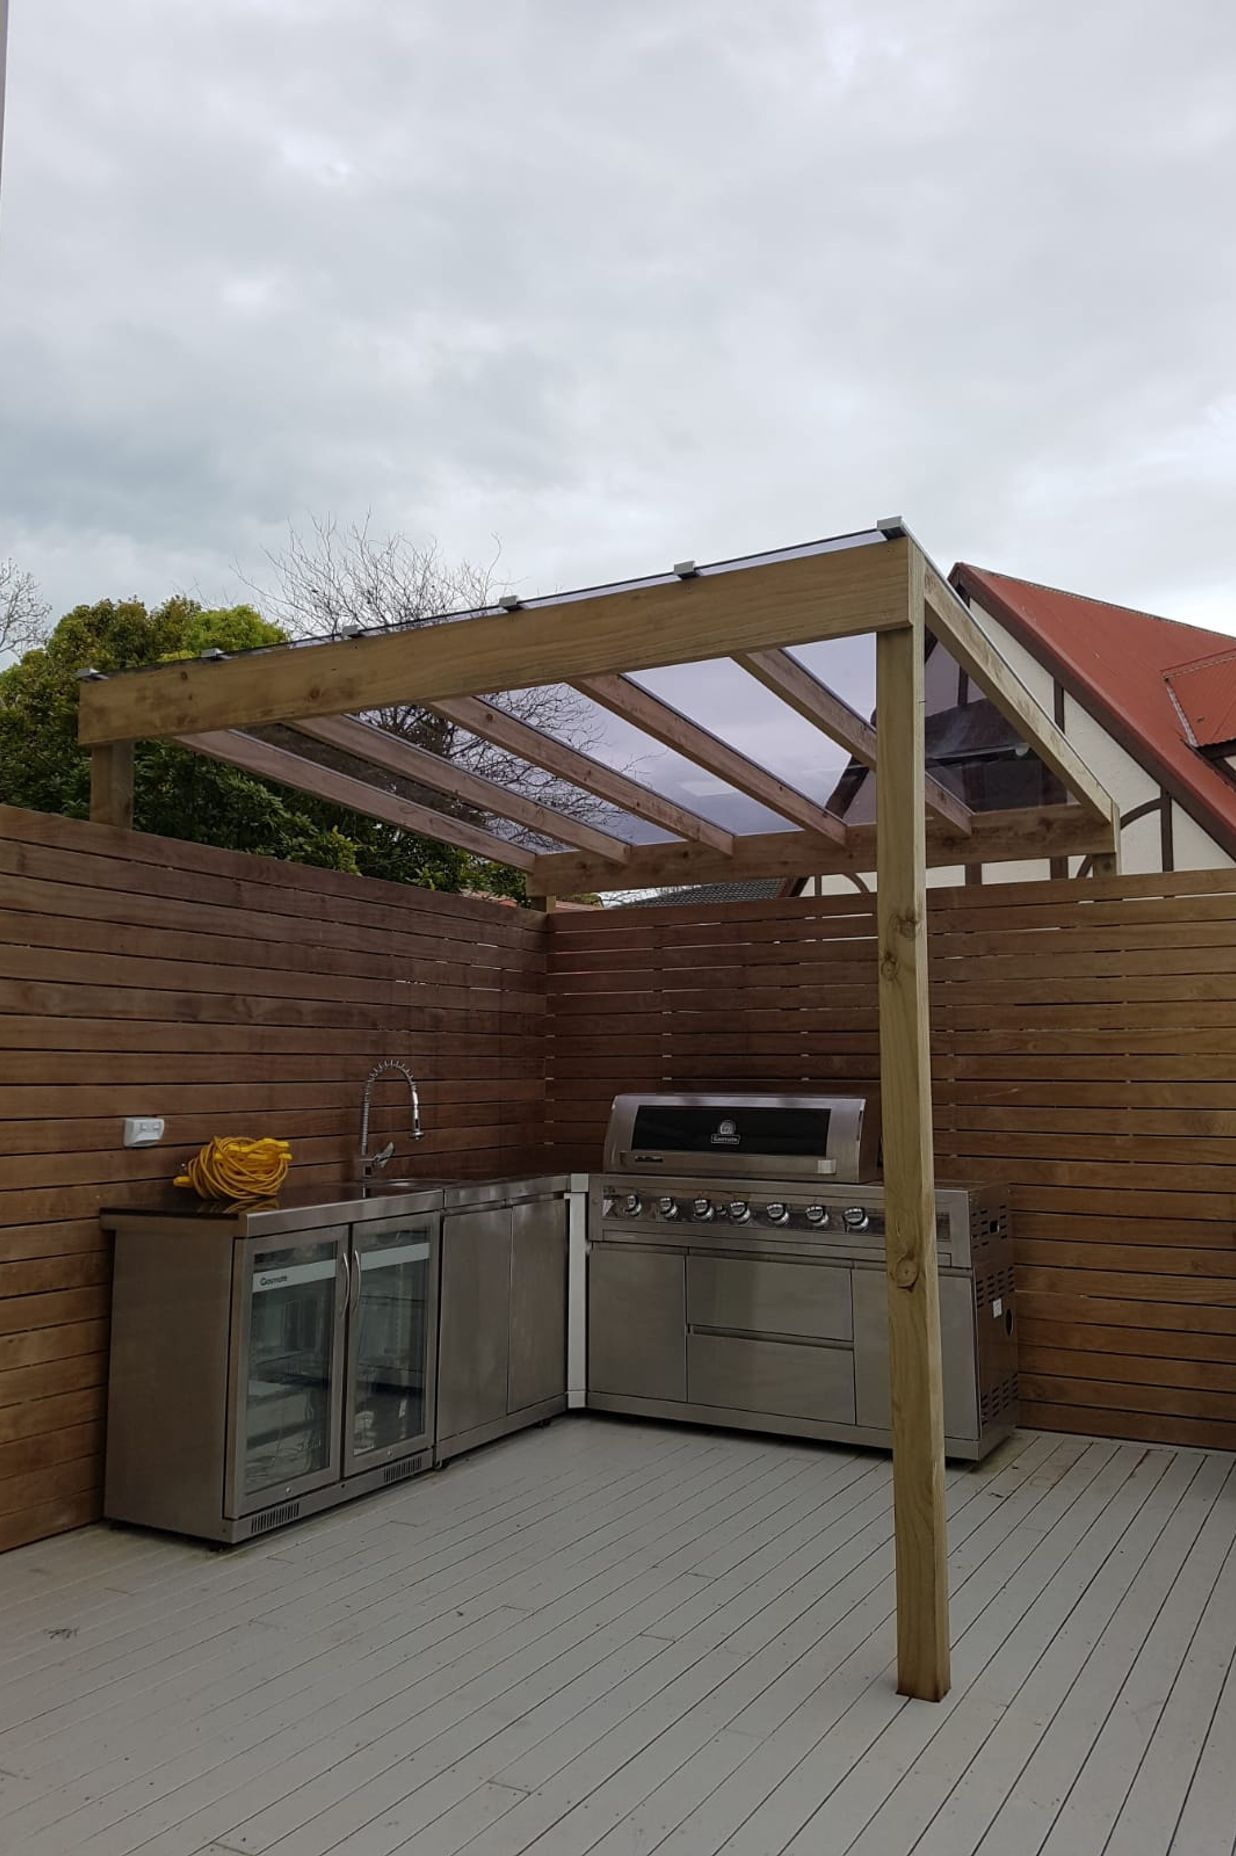  New clear roof over outdoor kitchen.